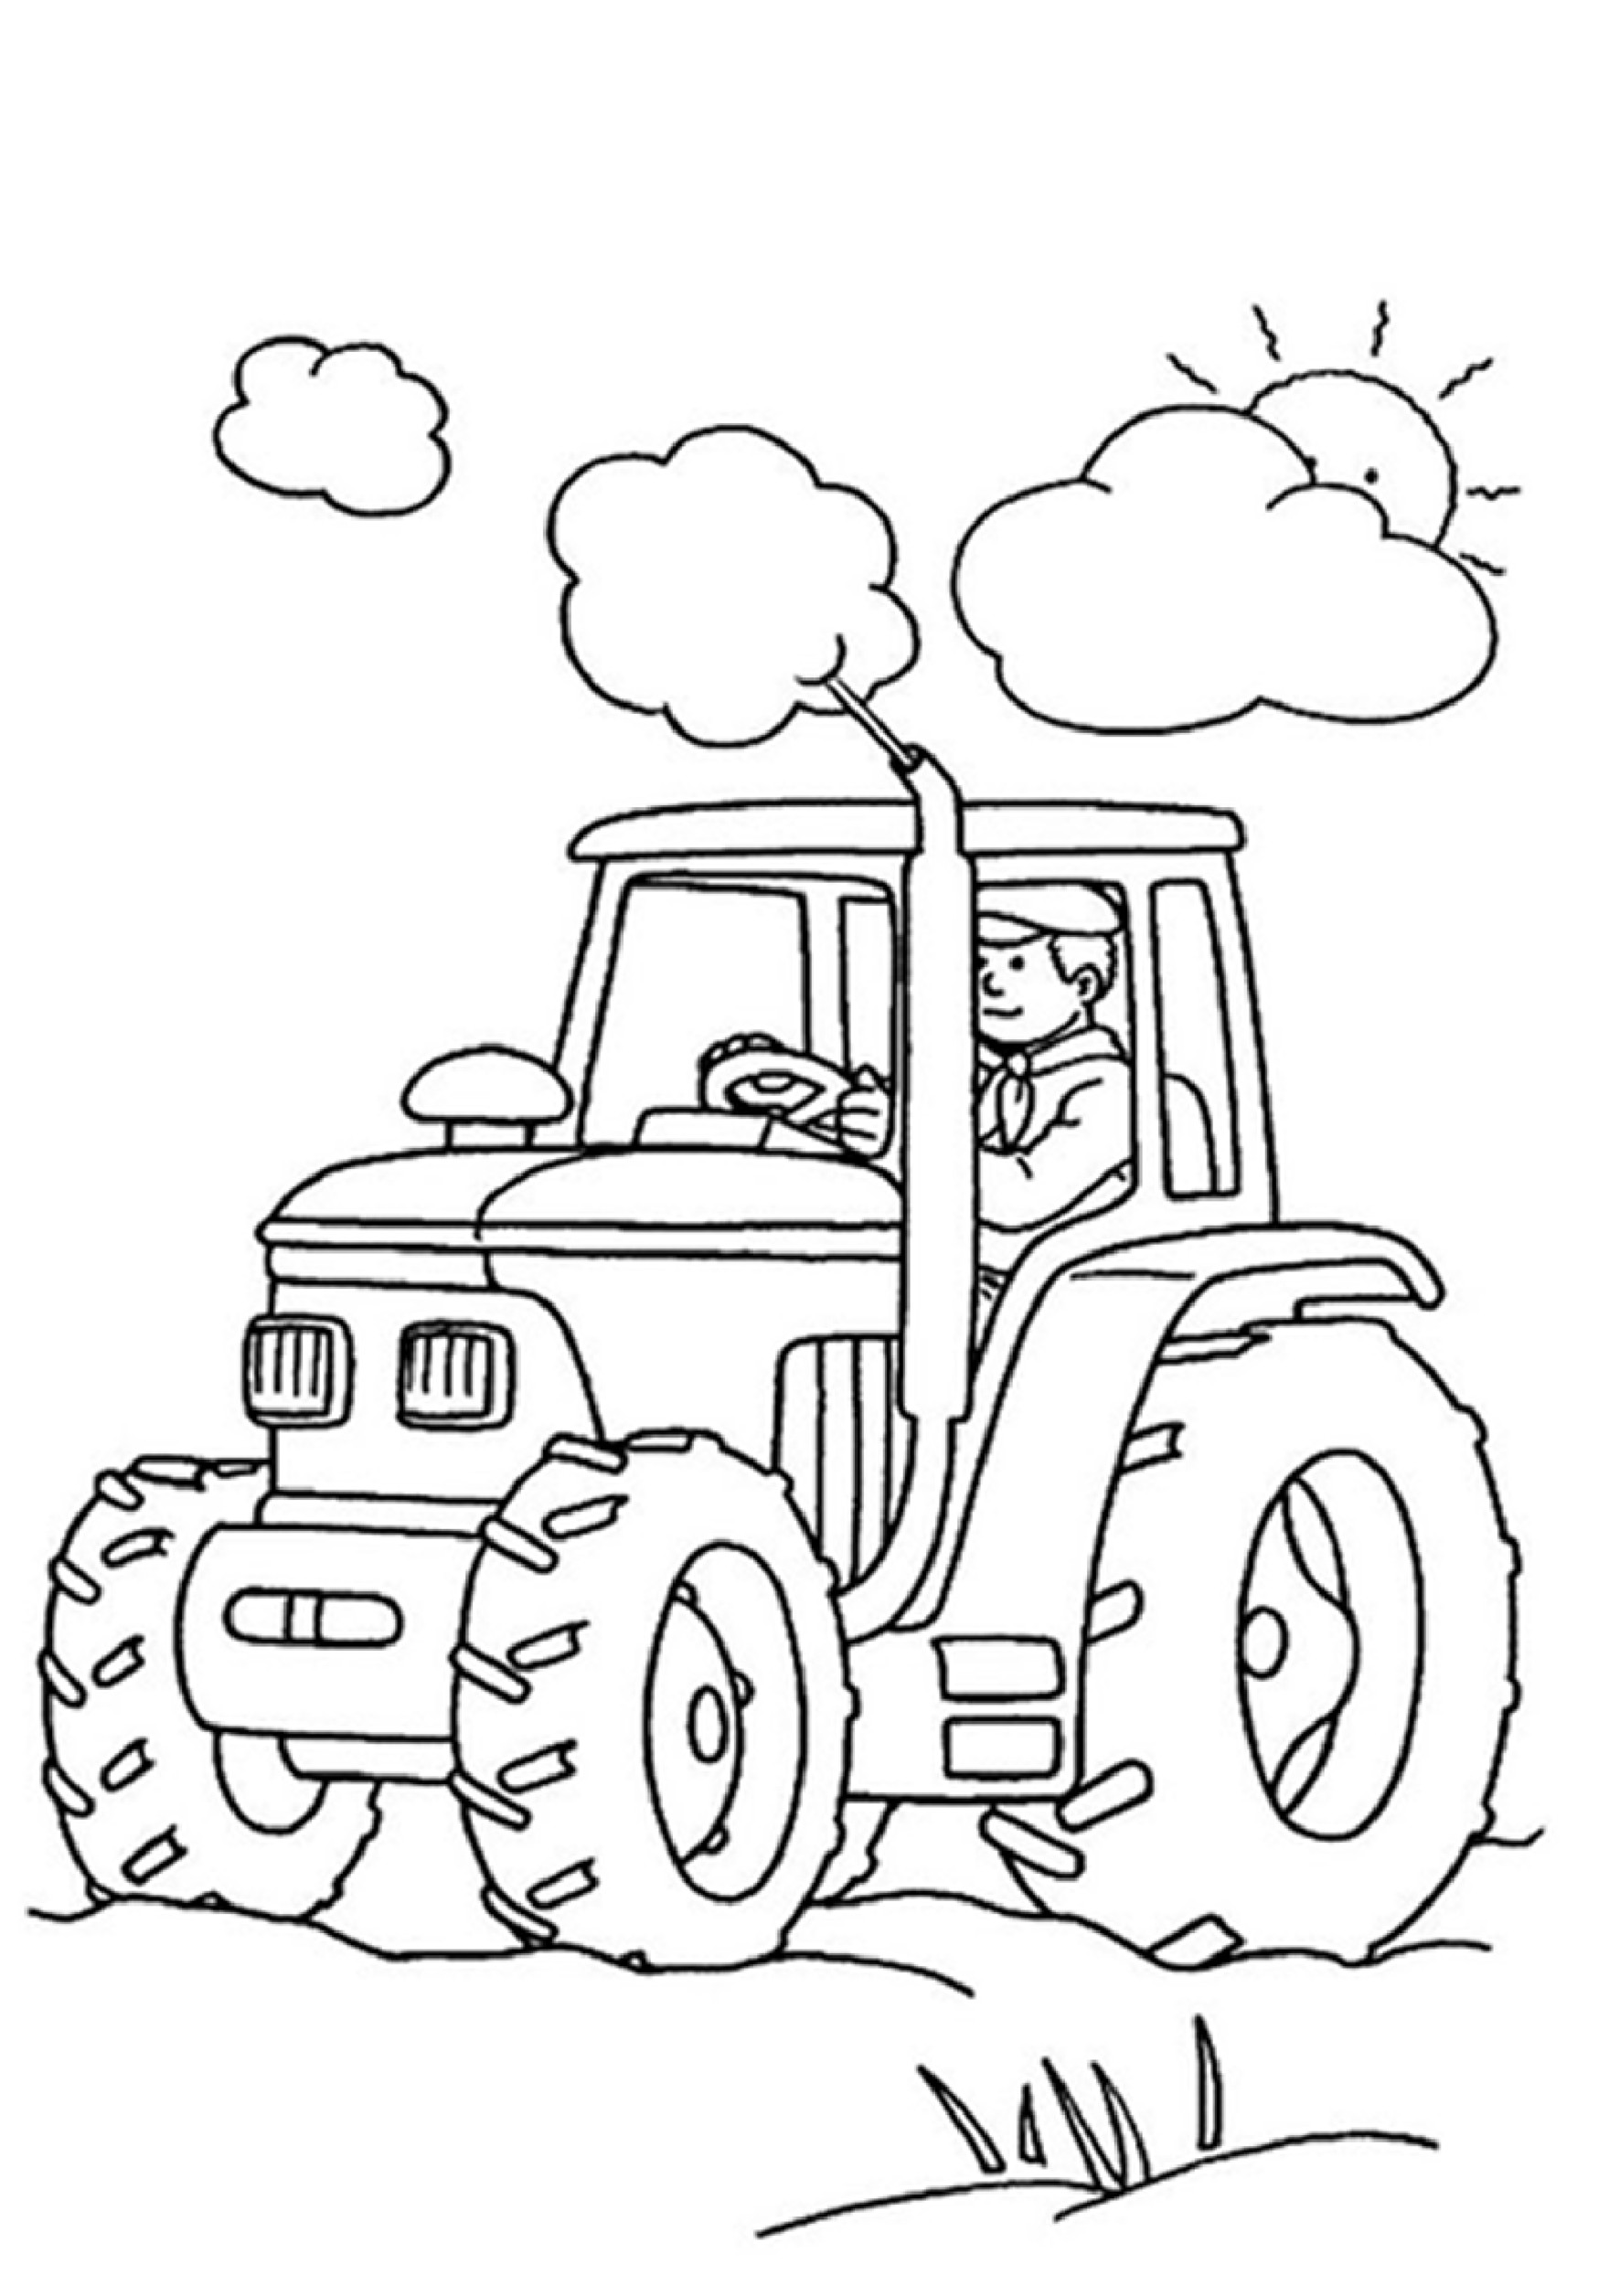 Coloring Pages For Boys Simple
 Coloring pages for boys